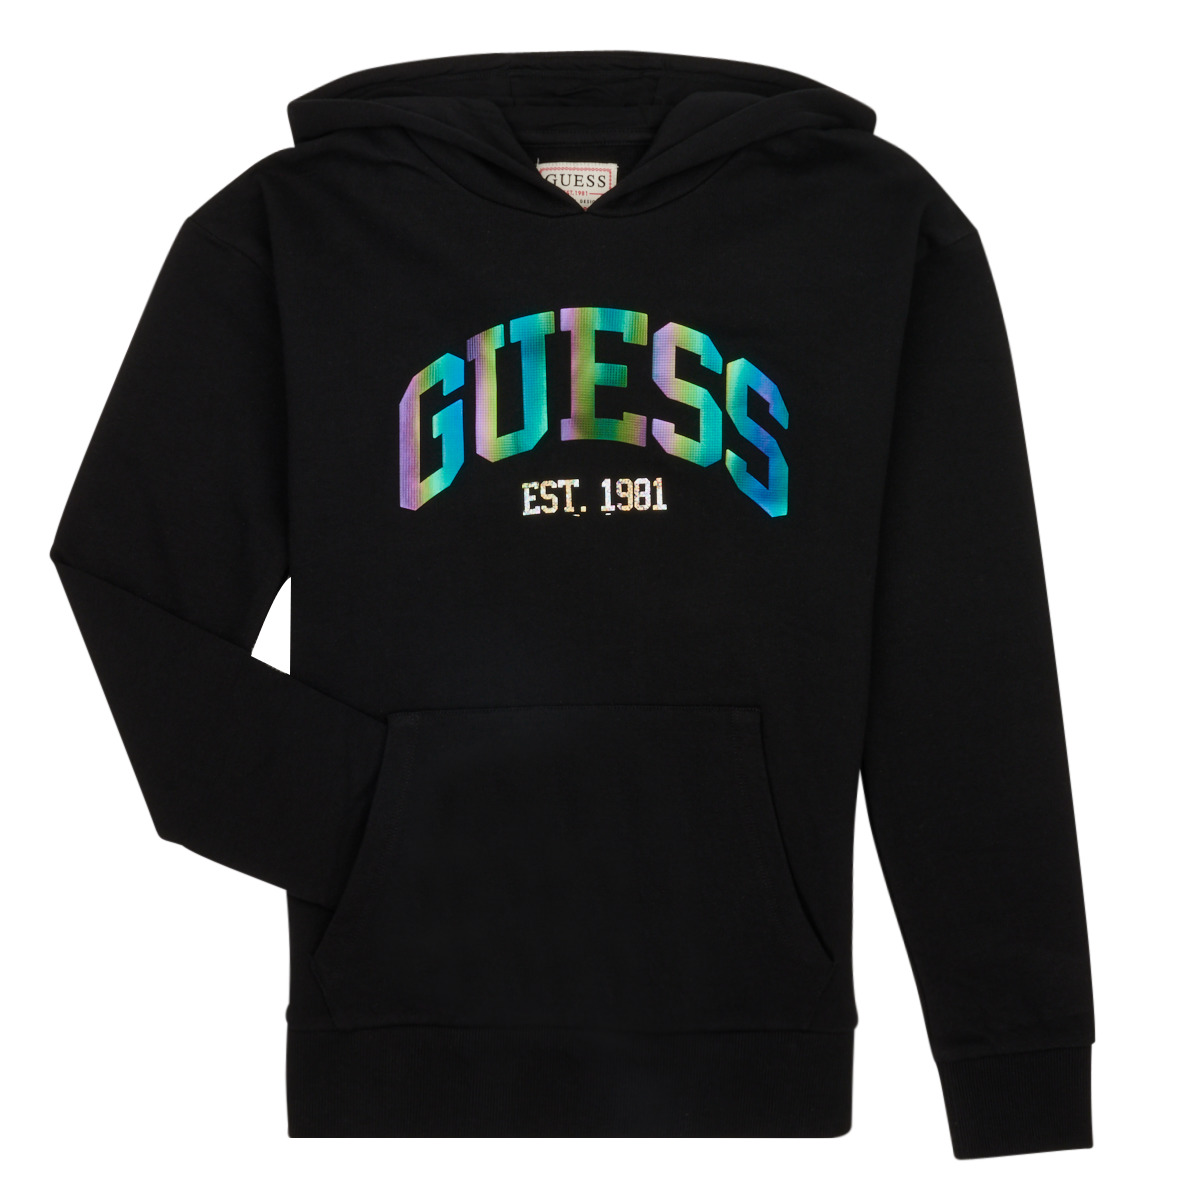 Guess Noir LS HOODED ACTIVE TOP wnYdpPNX